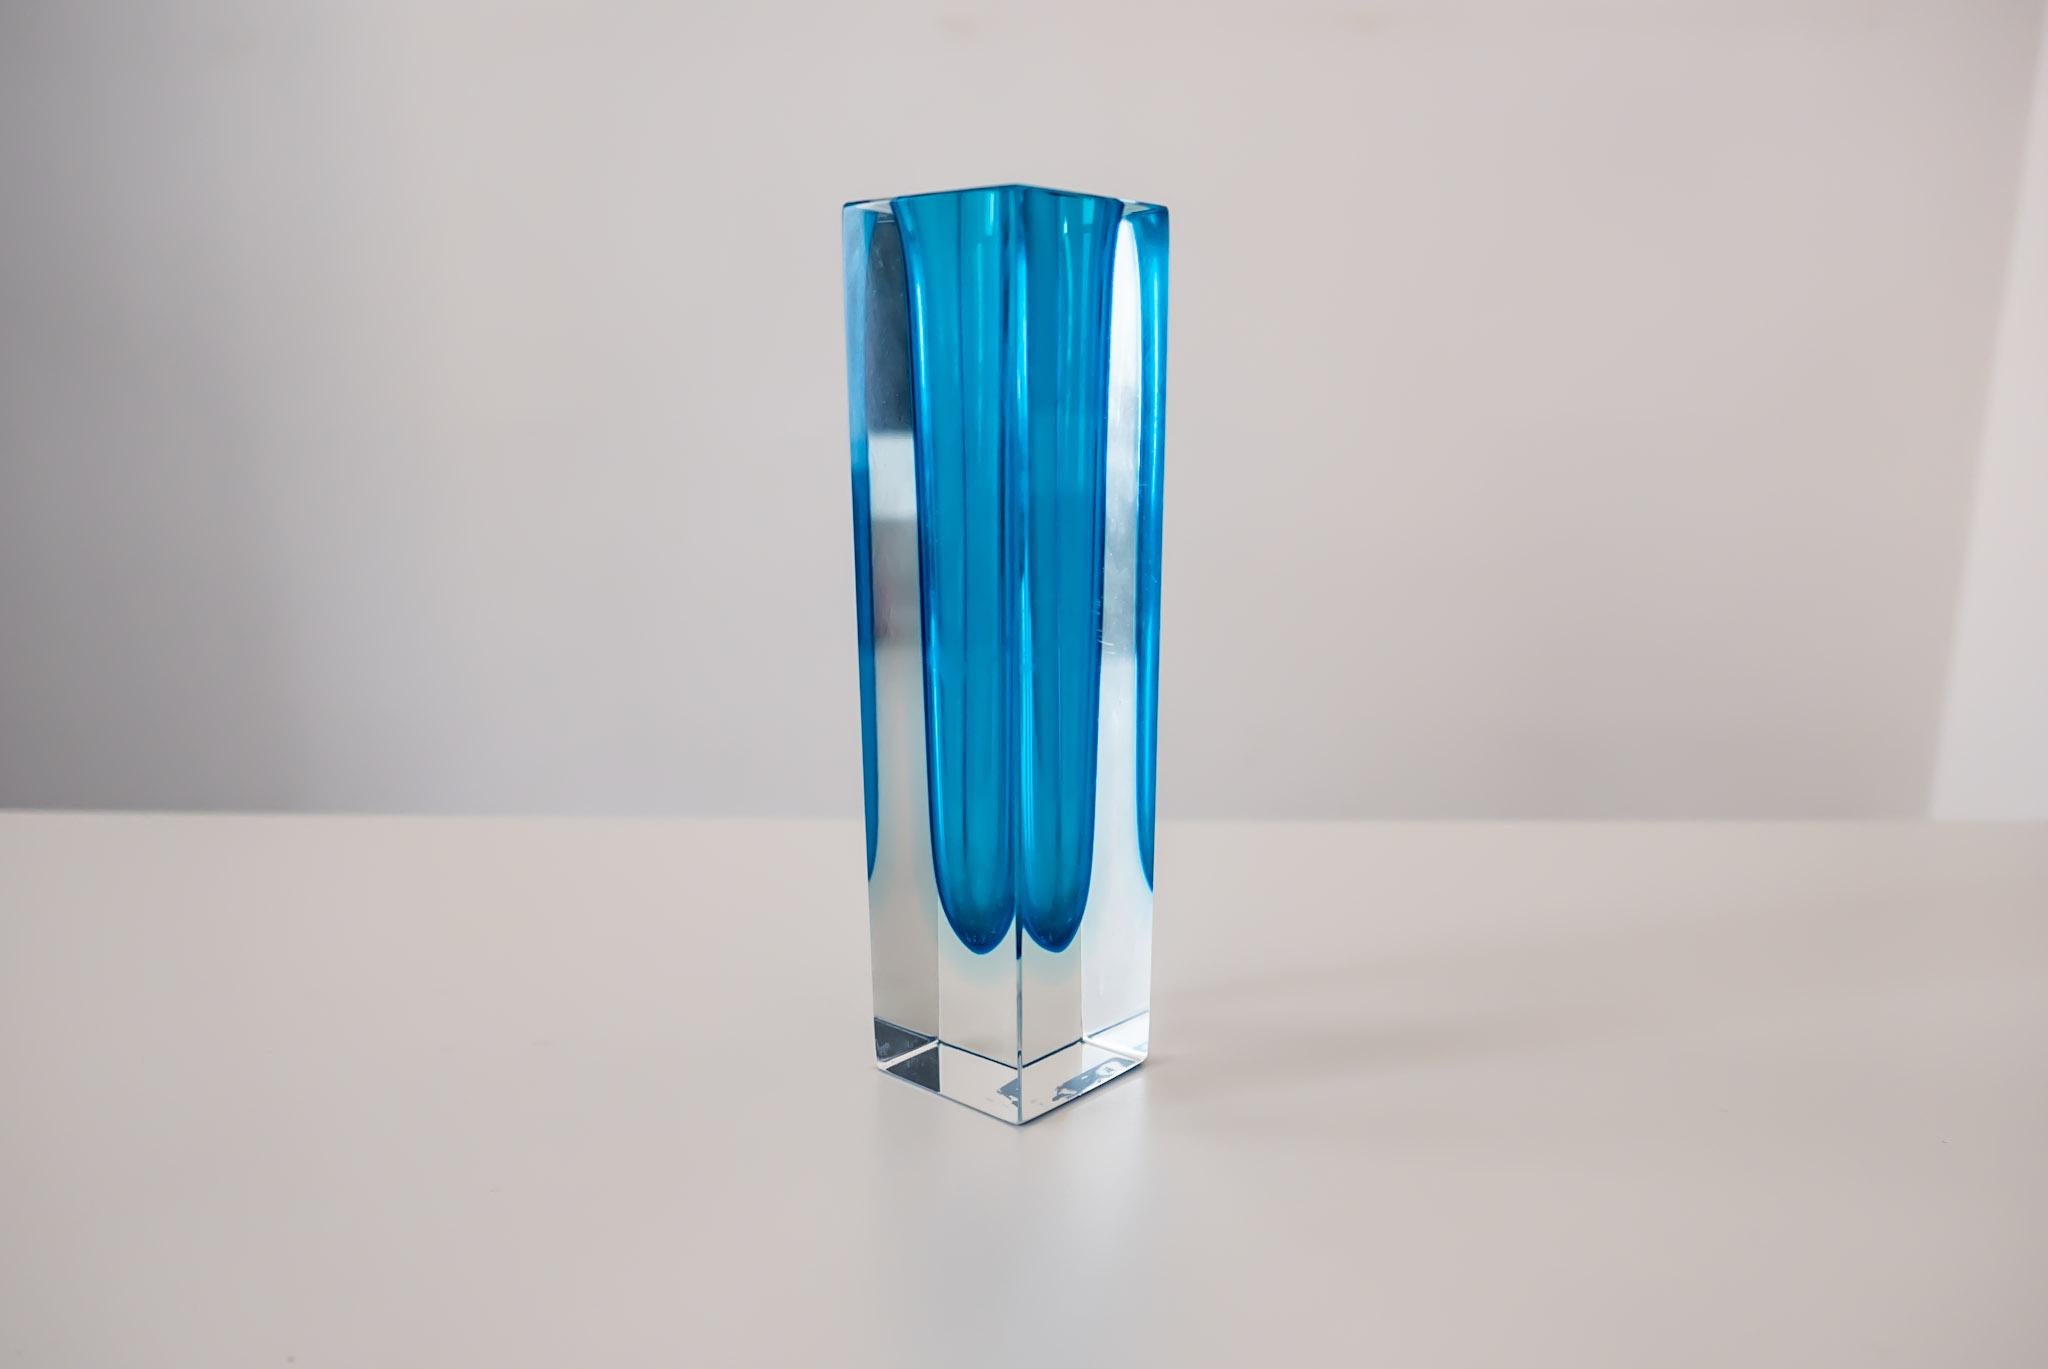 Turquoise Murano Sommerso glass vase by Flavio Poli, Italy 1960s.

This ashtonishing turquoise Murano Glass vase by the Italian Designer Flavio Poli is the absolute eyecatcher for any modern home. In the years between 1950 and 1960, Poli designed